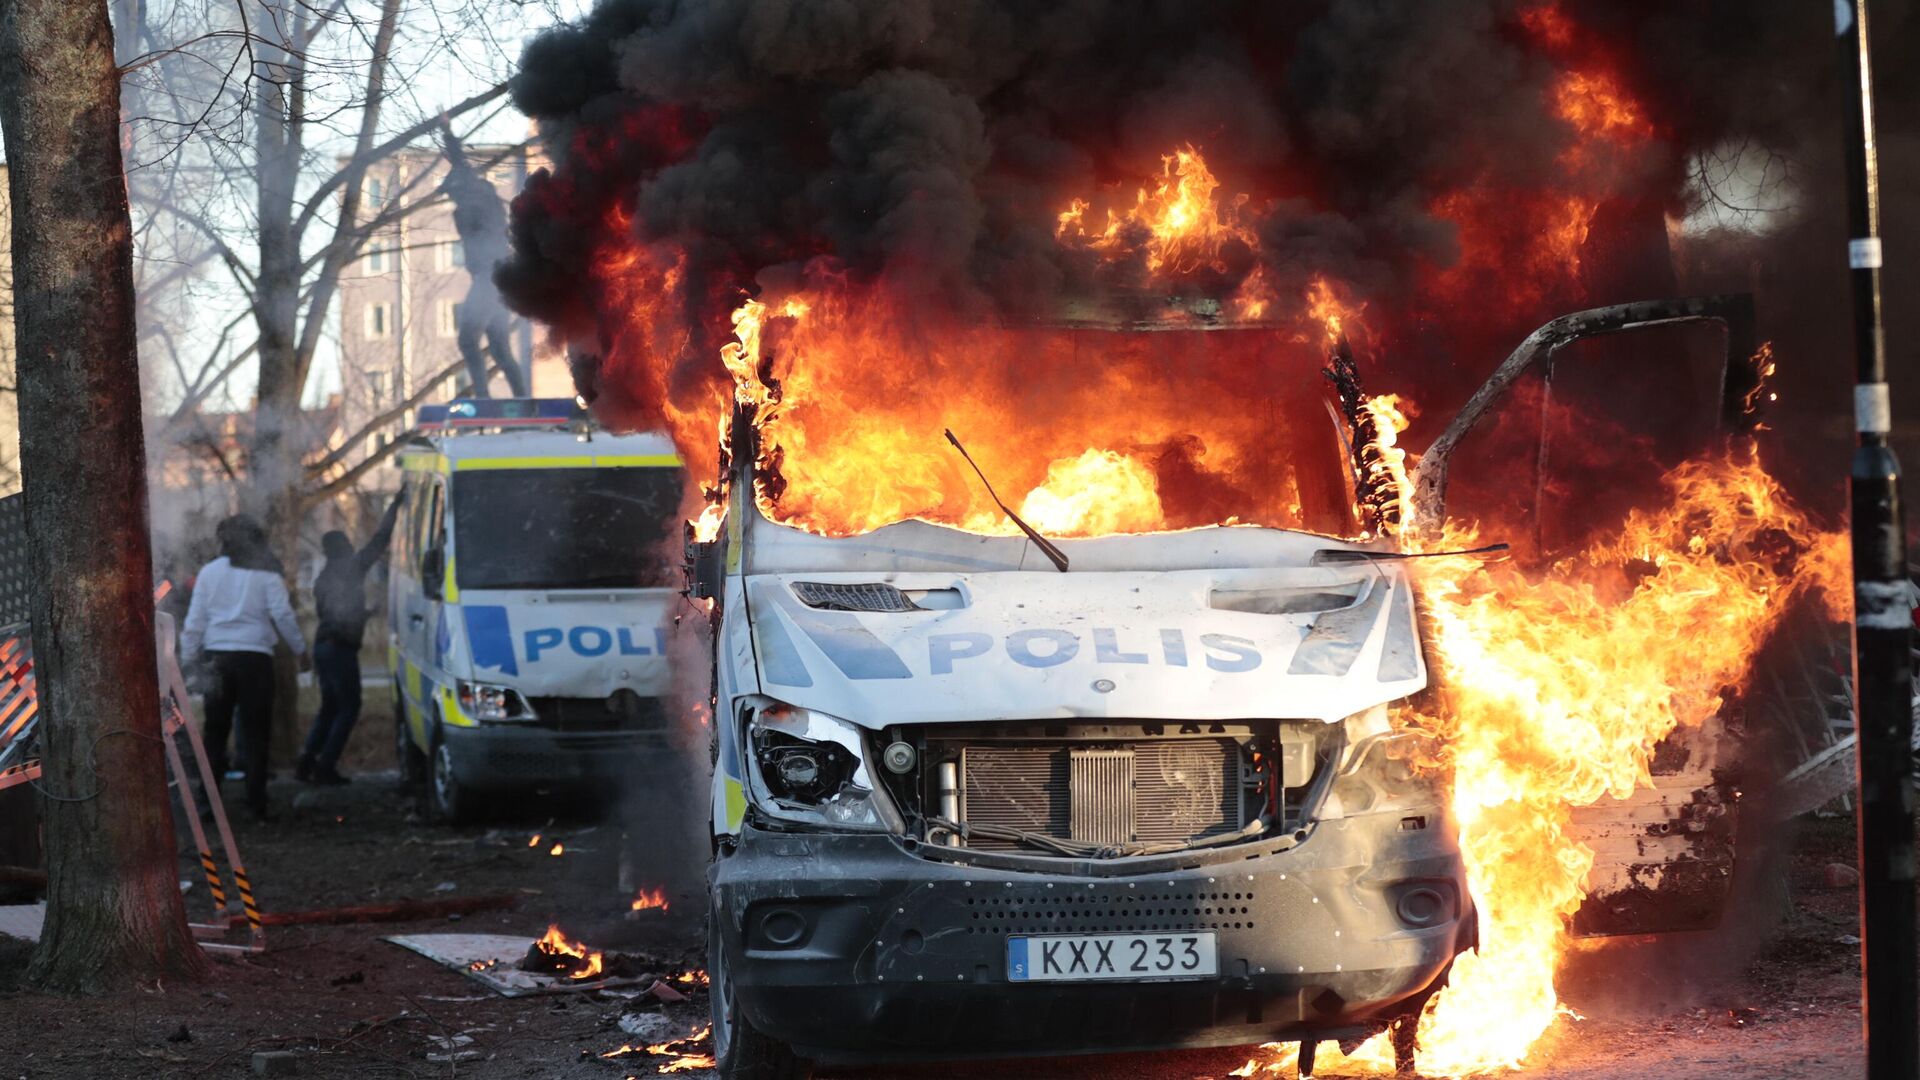 Police vans are on fire during a counter-protest in the park Sveaparken in Orebro, south-centre Sweden - Sputnik International, 1920, 18.04.2022